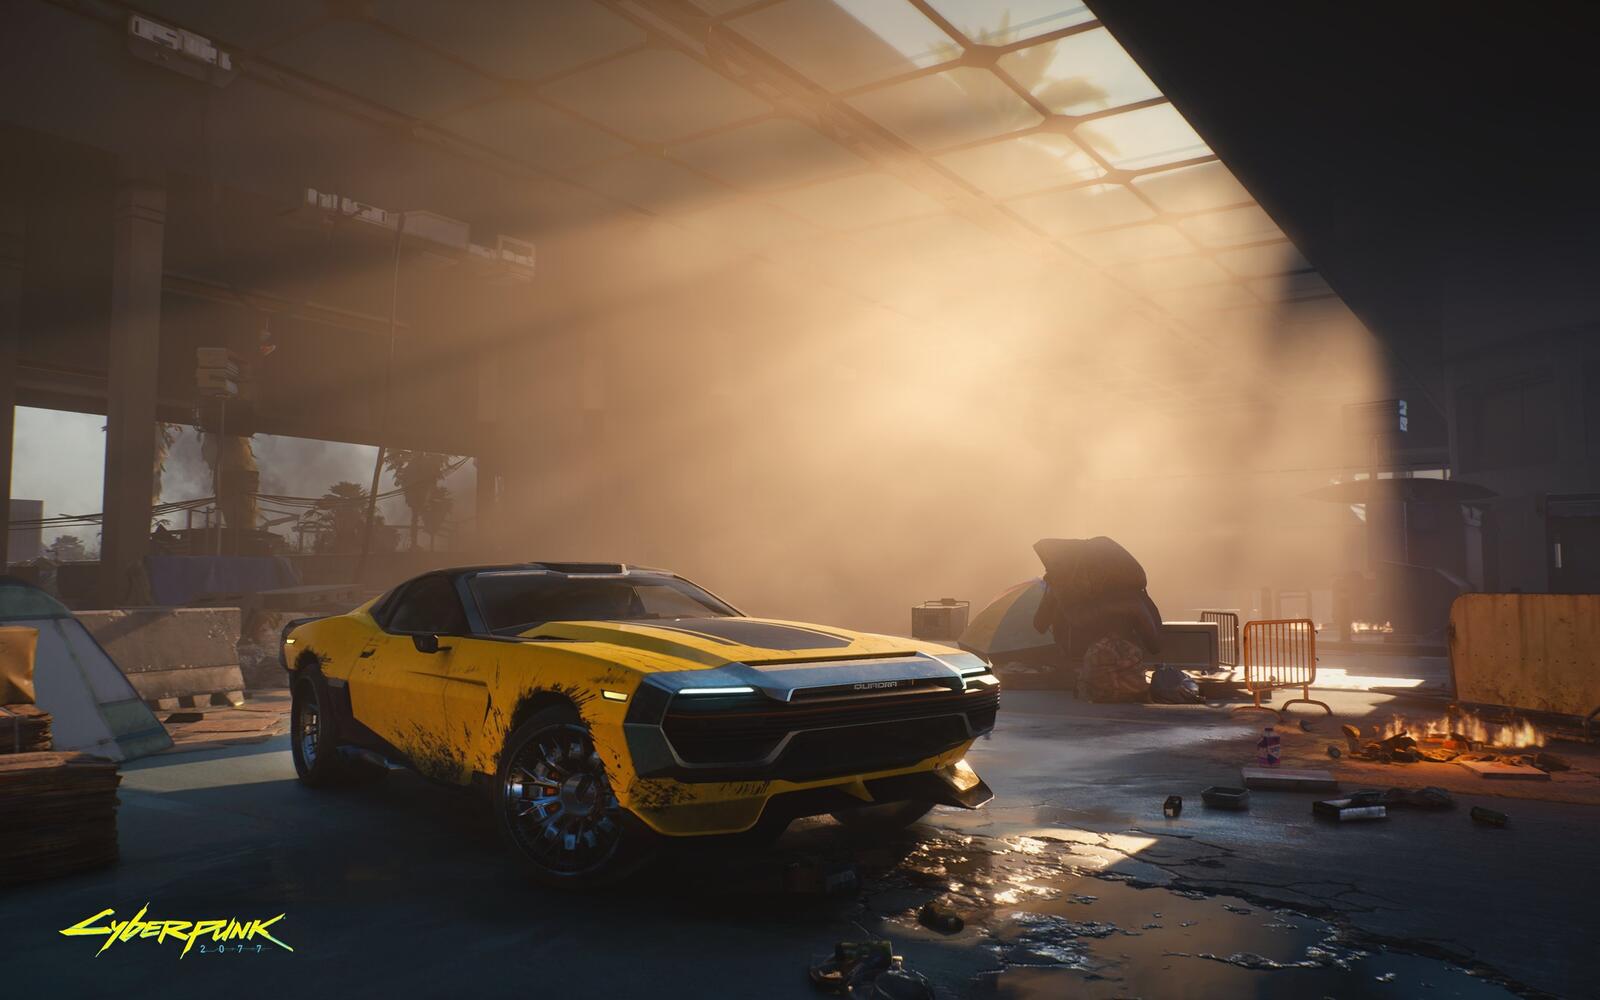 Free photo The yellow car from the game cyberpunk 2077.